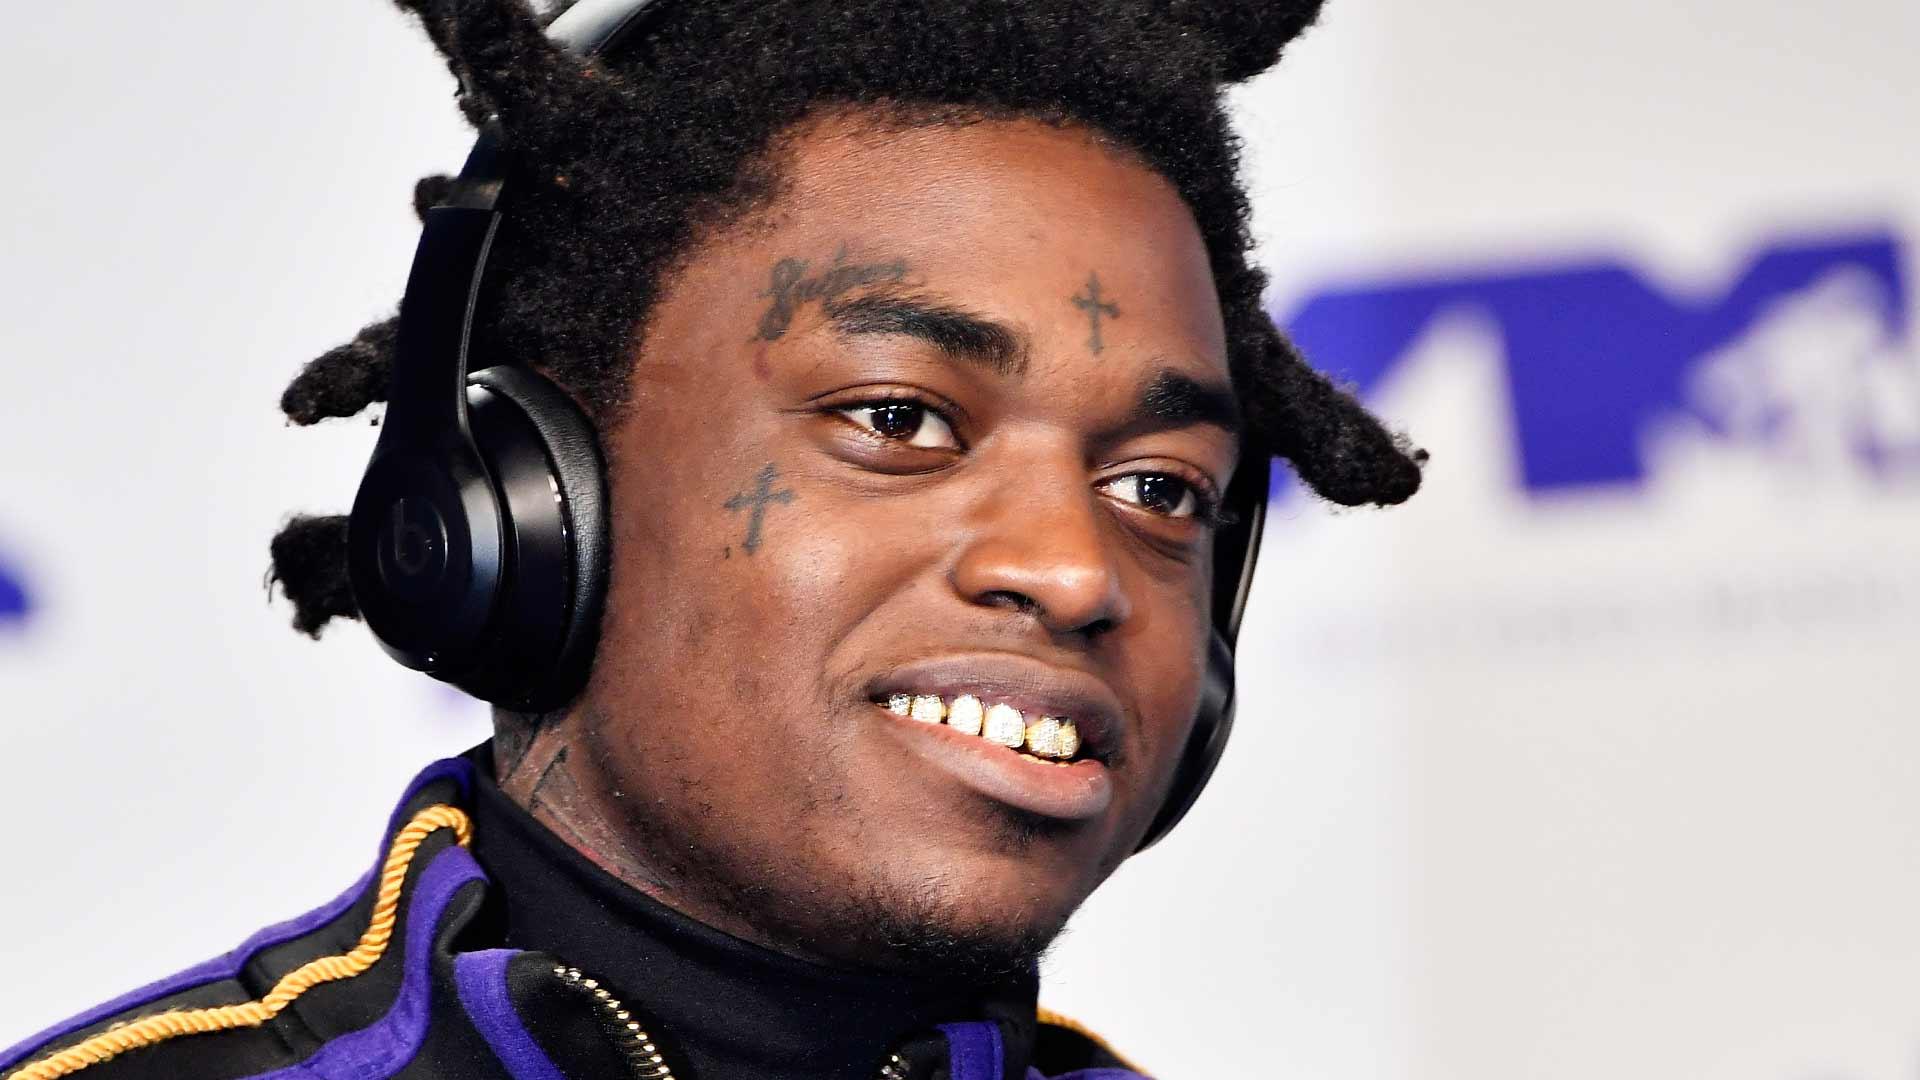 Kodak Black Offers to Pay for Funeral, Set Up Scholarship for Hero Student Who Died in Colorado STEM School Shooting